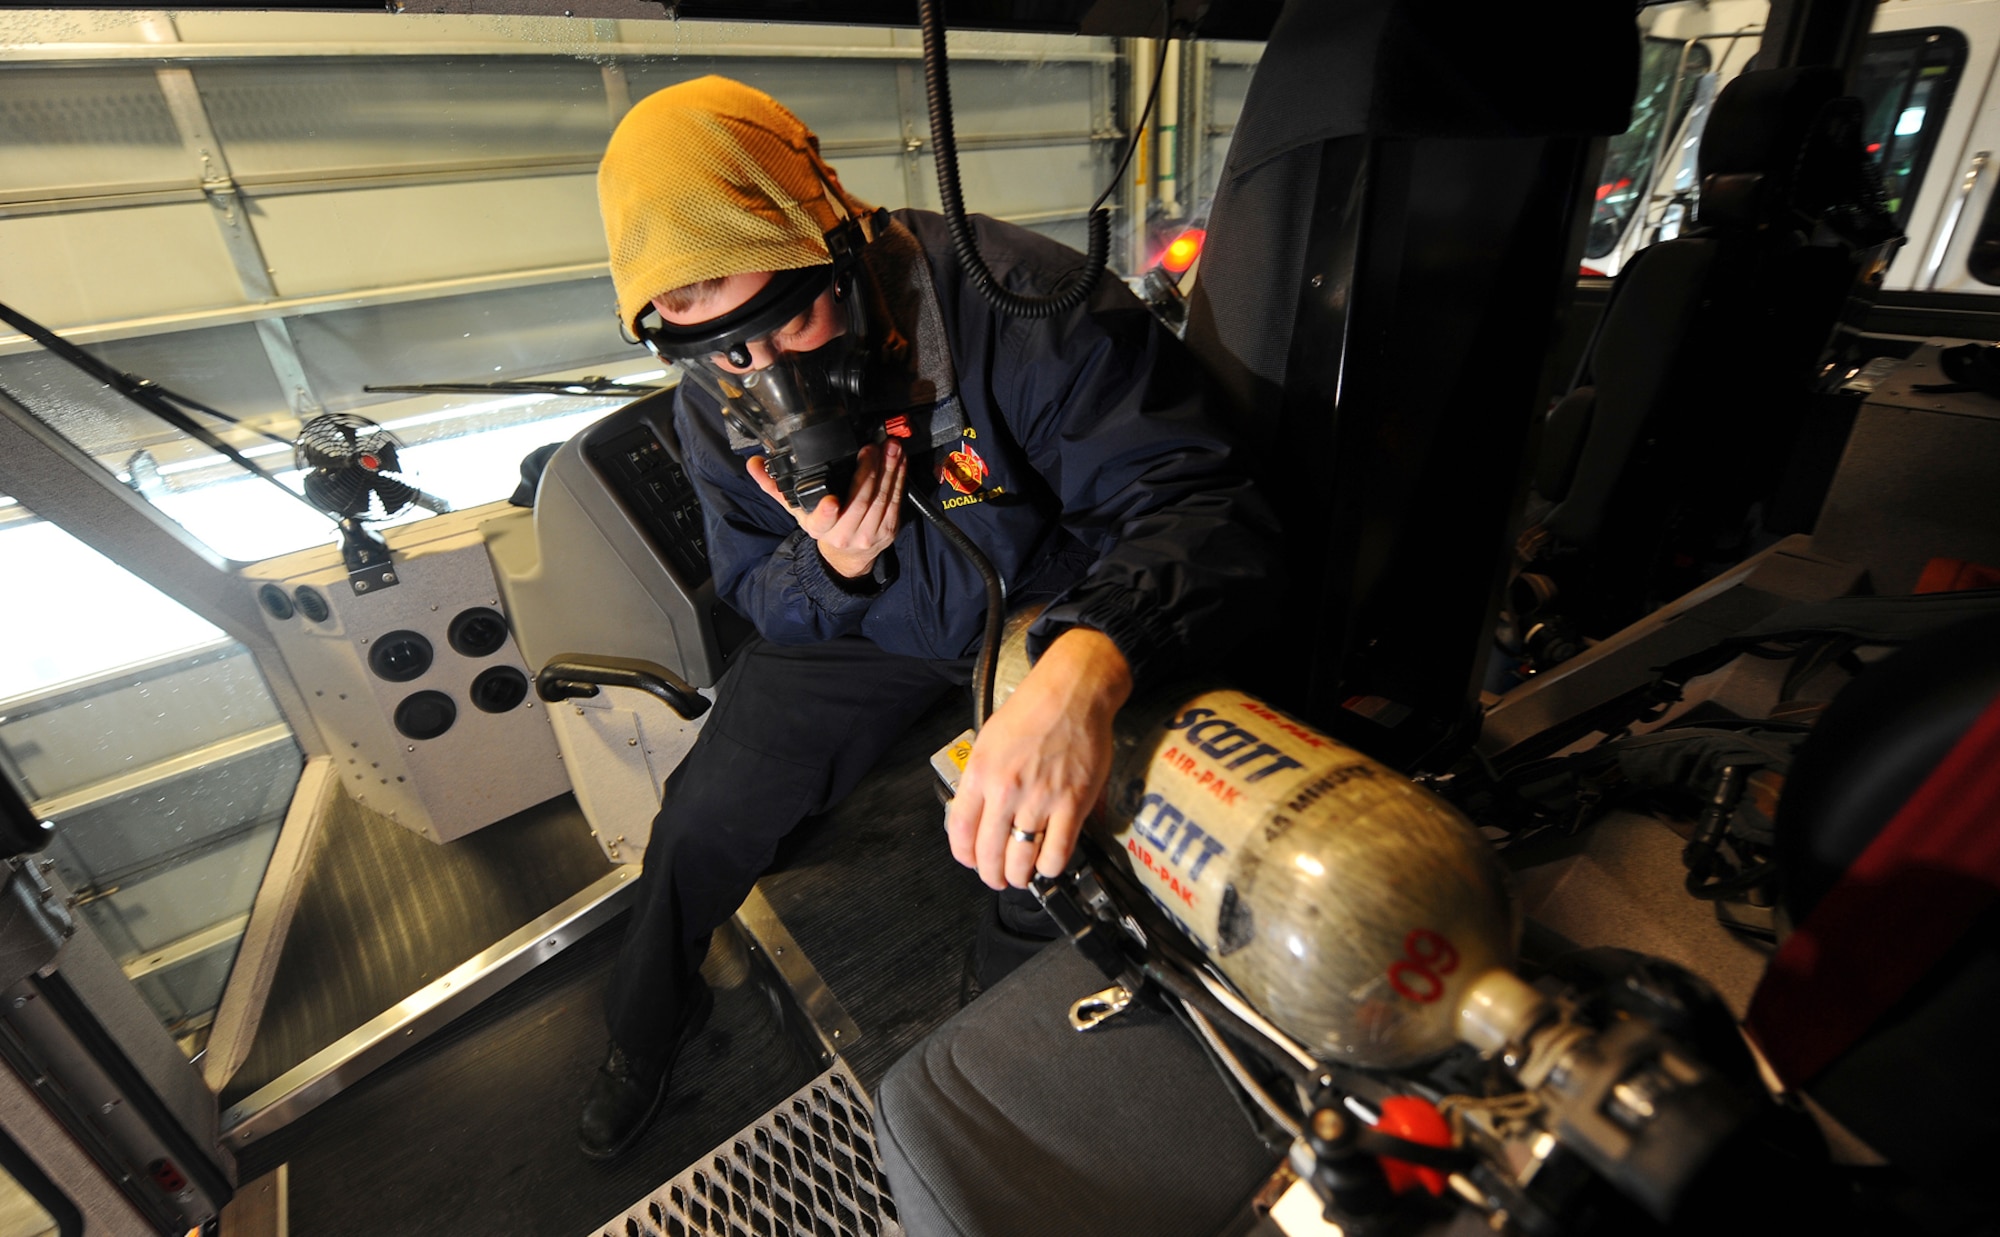 OFFUTT AIR FORCE BASE, Neb.- Derek Larson, a firefighter and driver engineer for the 55th Civil Engineering Squadron Fire Department, checks the Self Contained Breathing Apparatus, or SCBA, for operational readiness inside a fire truck as part of daily operational checks  Feb. 5. Firefighters with the fire department, perform a long list of equipment checks daily. U.S. Air Force photo by Josh Plueger
